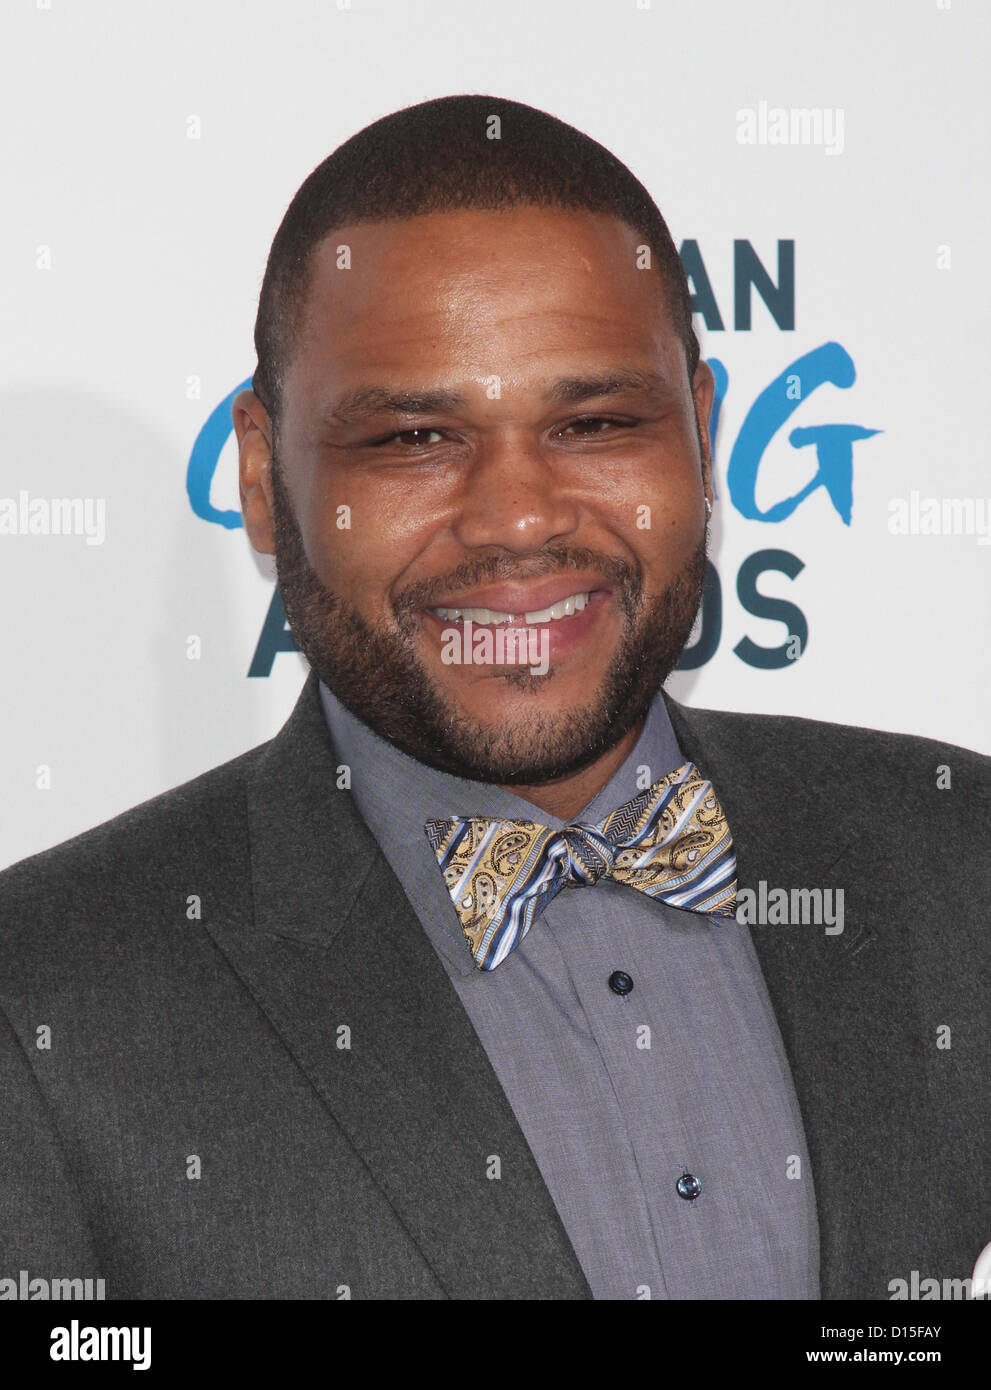 ANTHONY ANDERSON THE SECOND ANNUAL AMERICAN GIVING AWARDS PASADENA CALIFORNIA USA 07 December 2012 Stock Photo